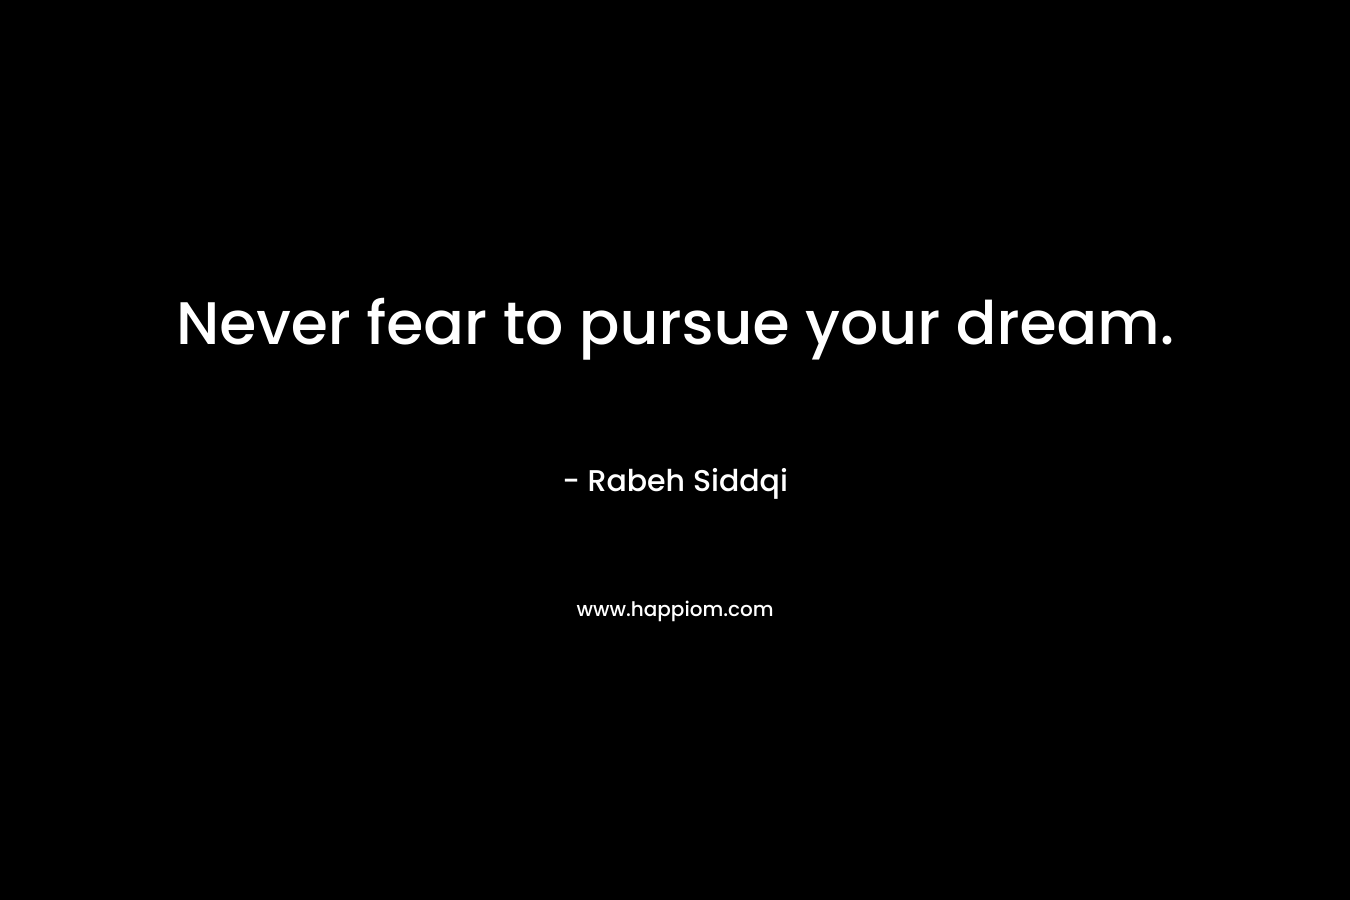 Never fear to pursue your dream. – Rabeh Siddqi